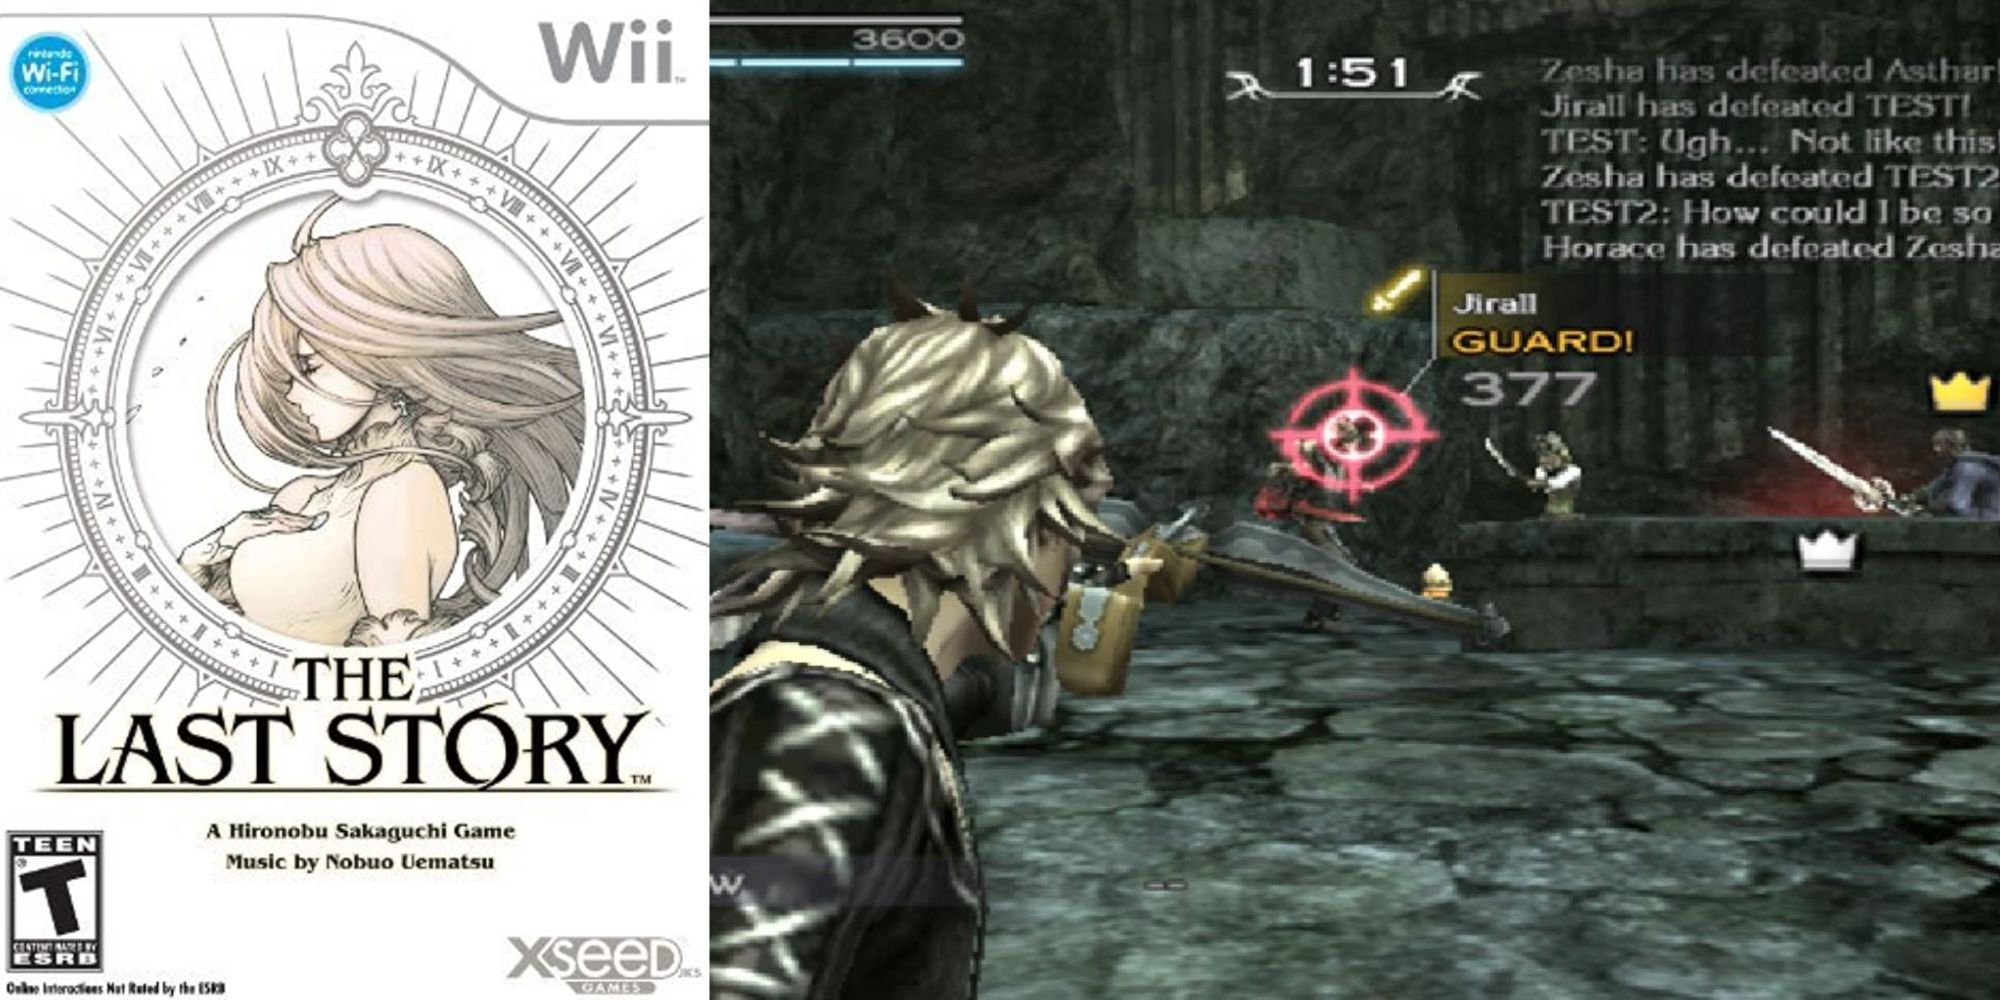 A split-image of the Wii artwork for The Last Story and the main protagonist firing a crossbow at enemies in gameplay.